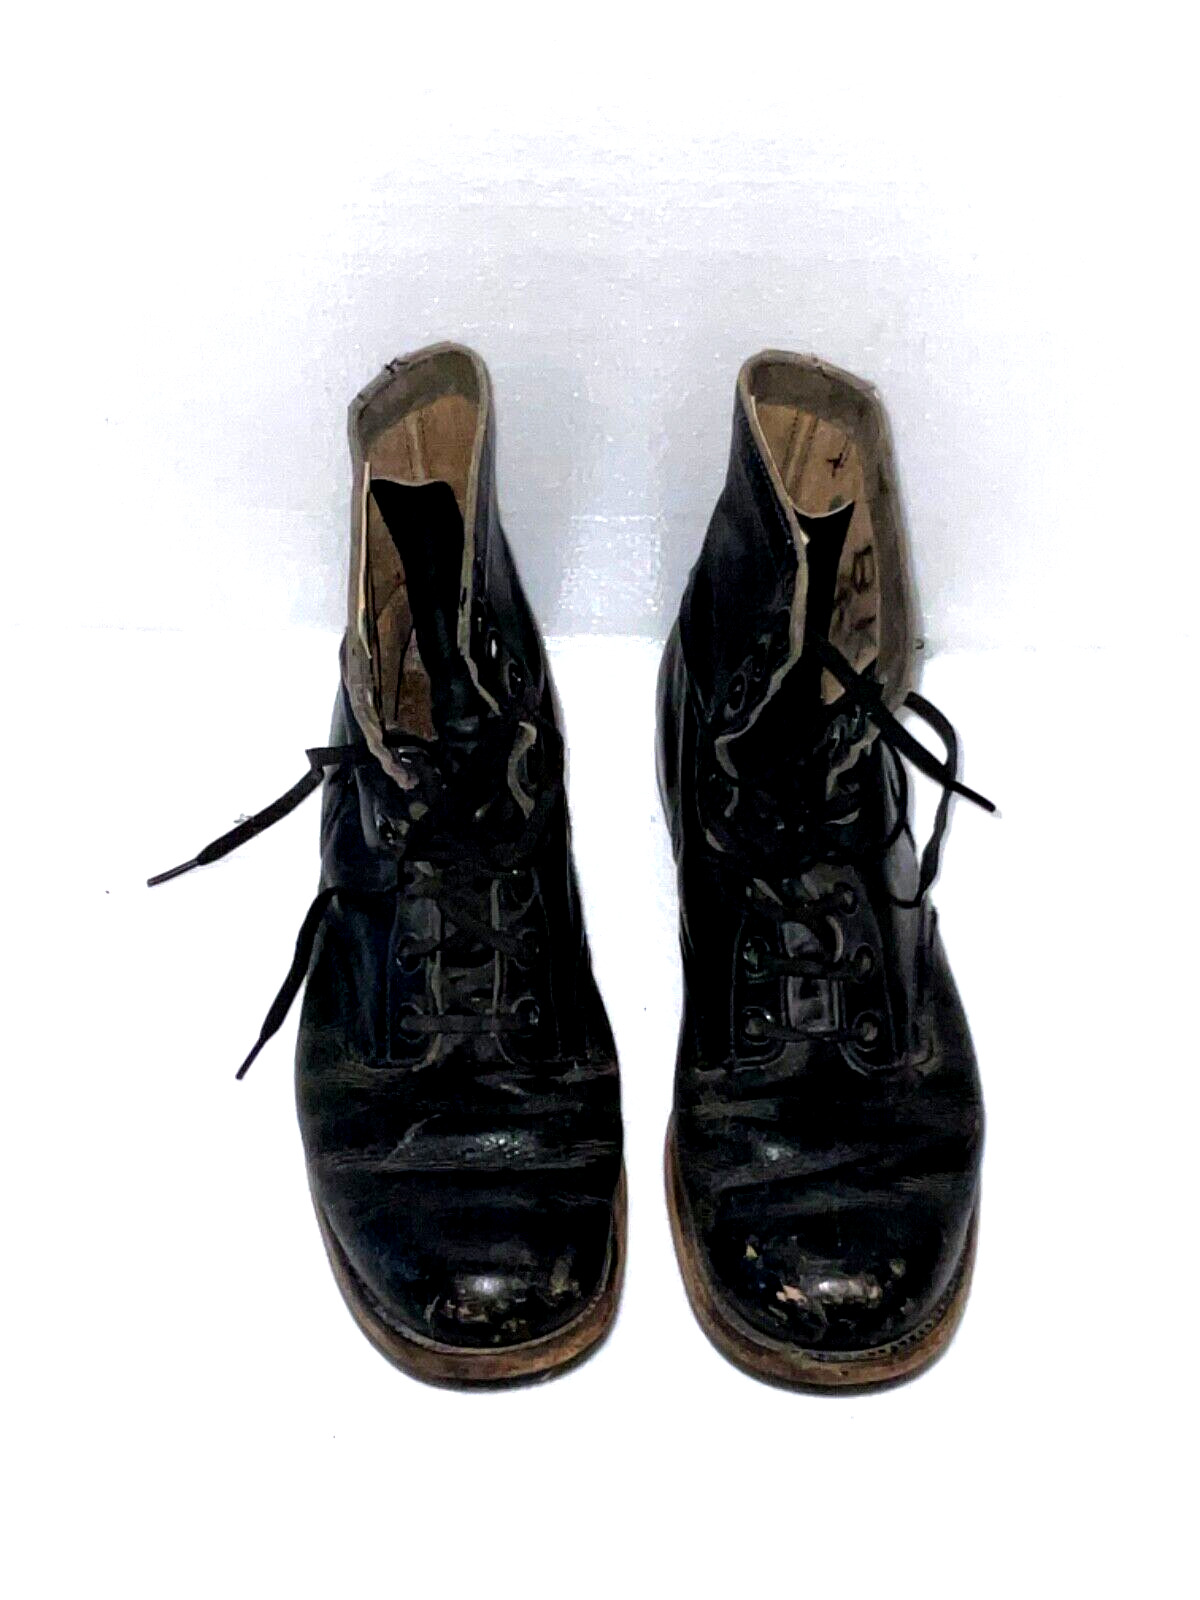 1964 VIETNAM WAR US MILITARY ISSUED LEATHER BILTRITE COMBAT BOOTS - PLEASE READ